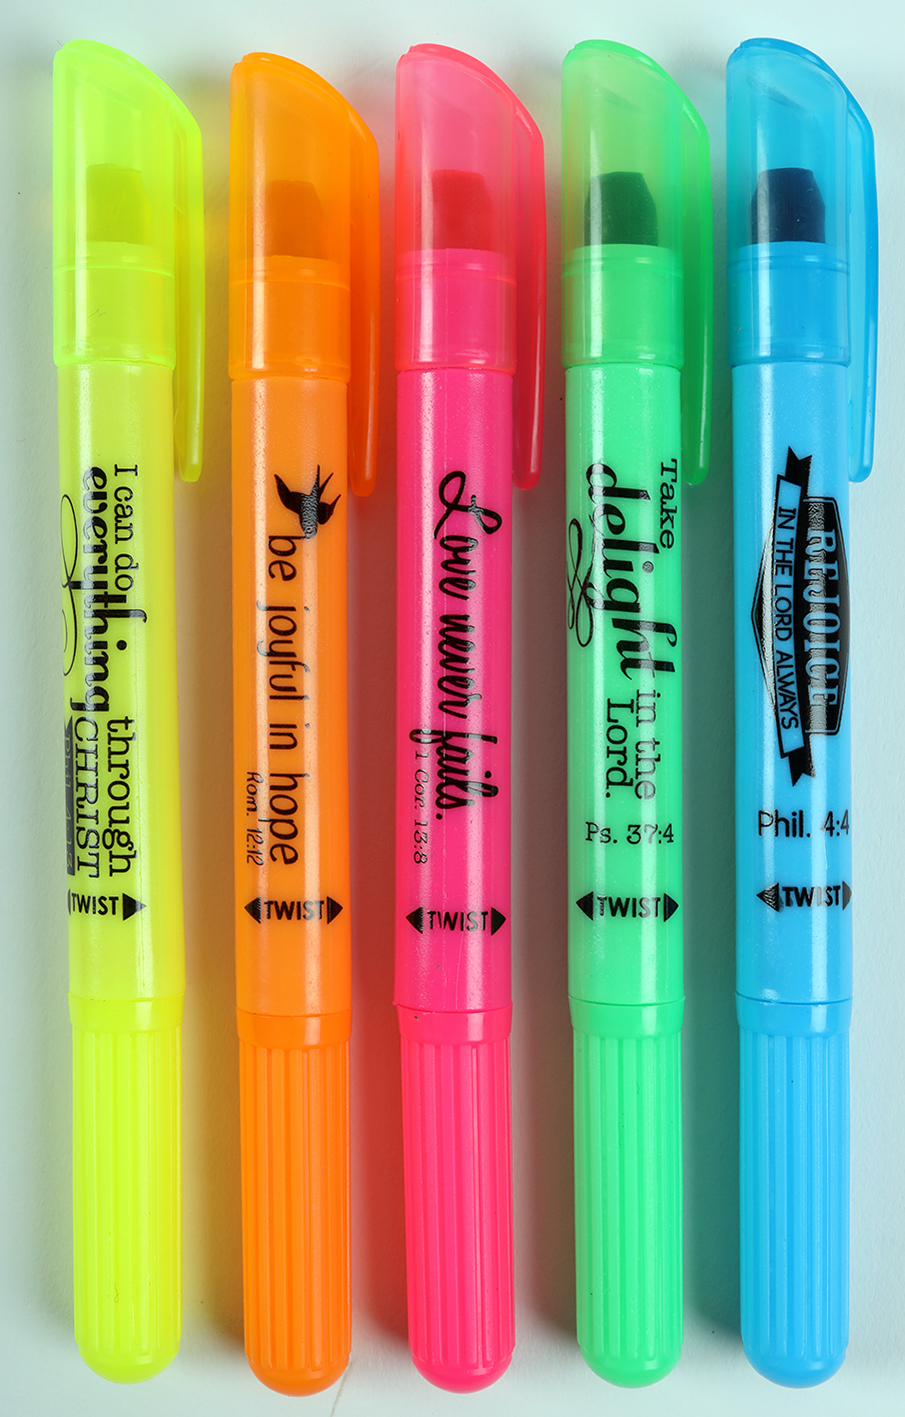 The Mega Deals Highlighters, 5pk. Highlighter- Fluorescent Highlighters Assorted Colors. Great Bible and Pens No Bleed. Pink, Orange, Blue, Green Yell